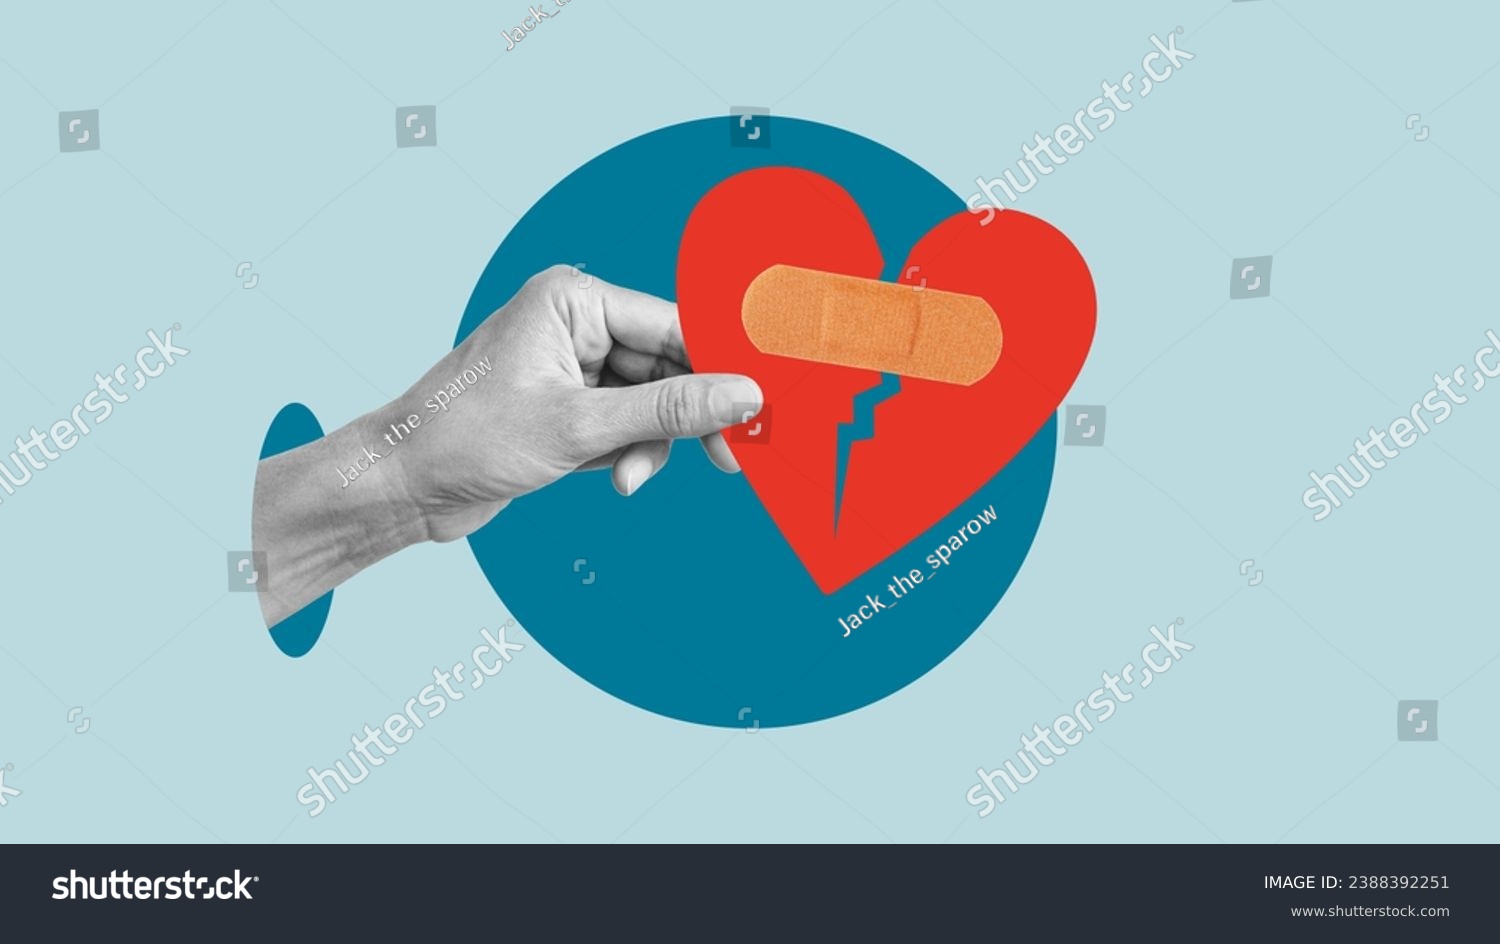 Collage with the hand with heart with band-aid. Healing heart, healing from breakup, healing from divorce, therapy to feel better, putting the pieces of the heart together #2388392251